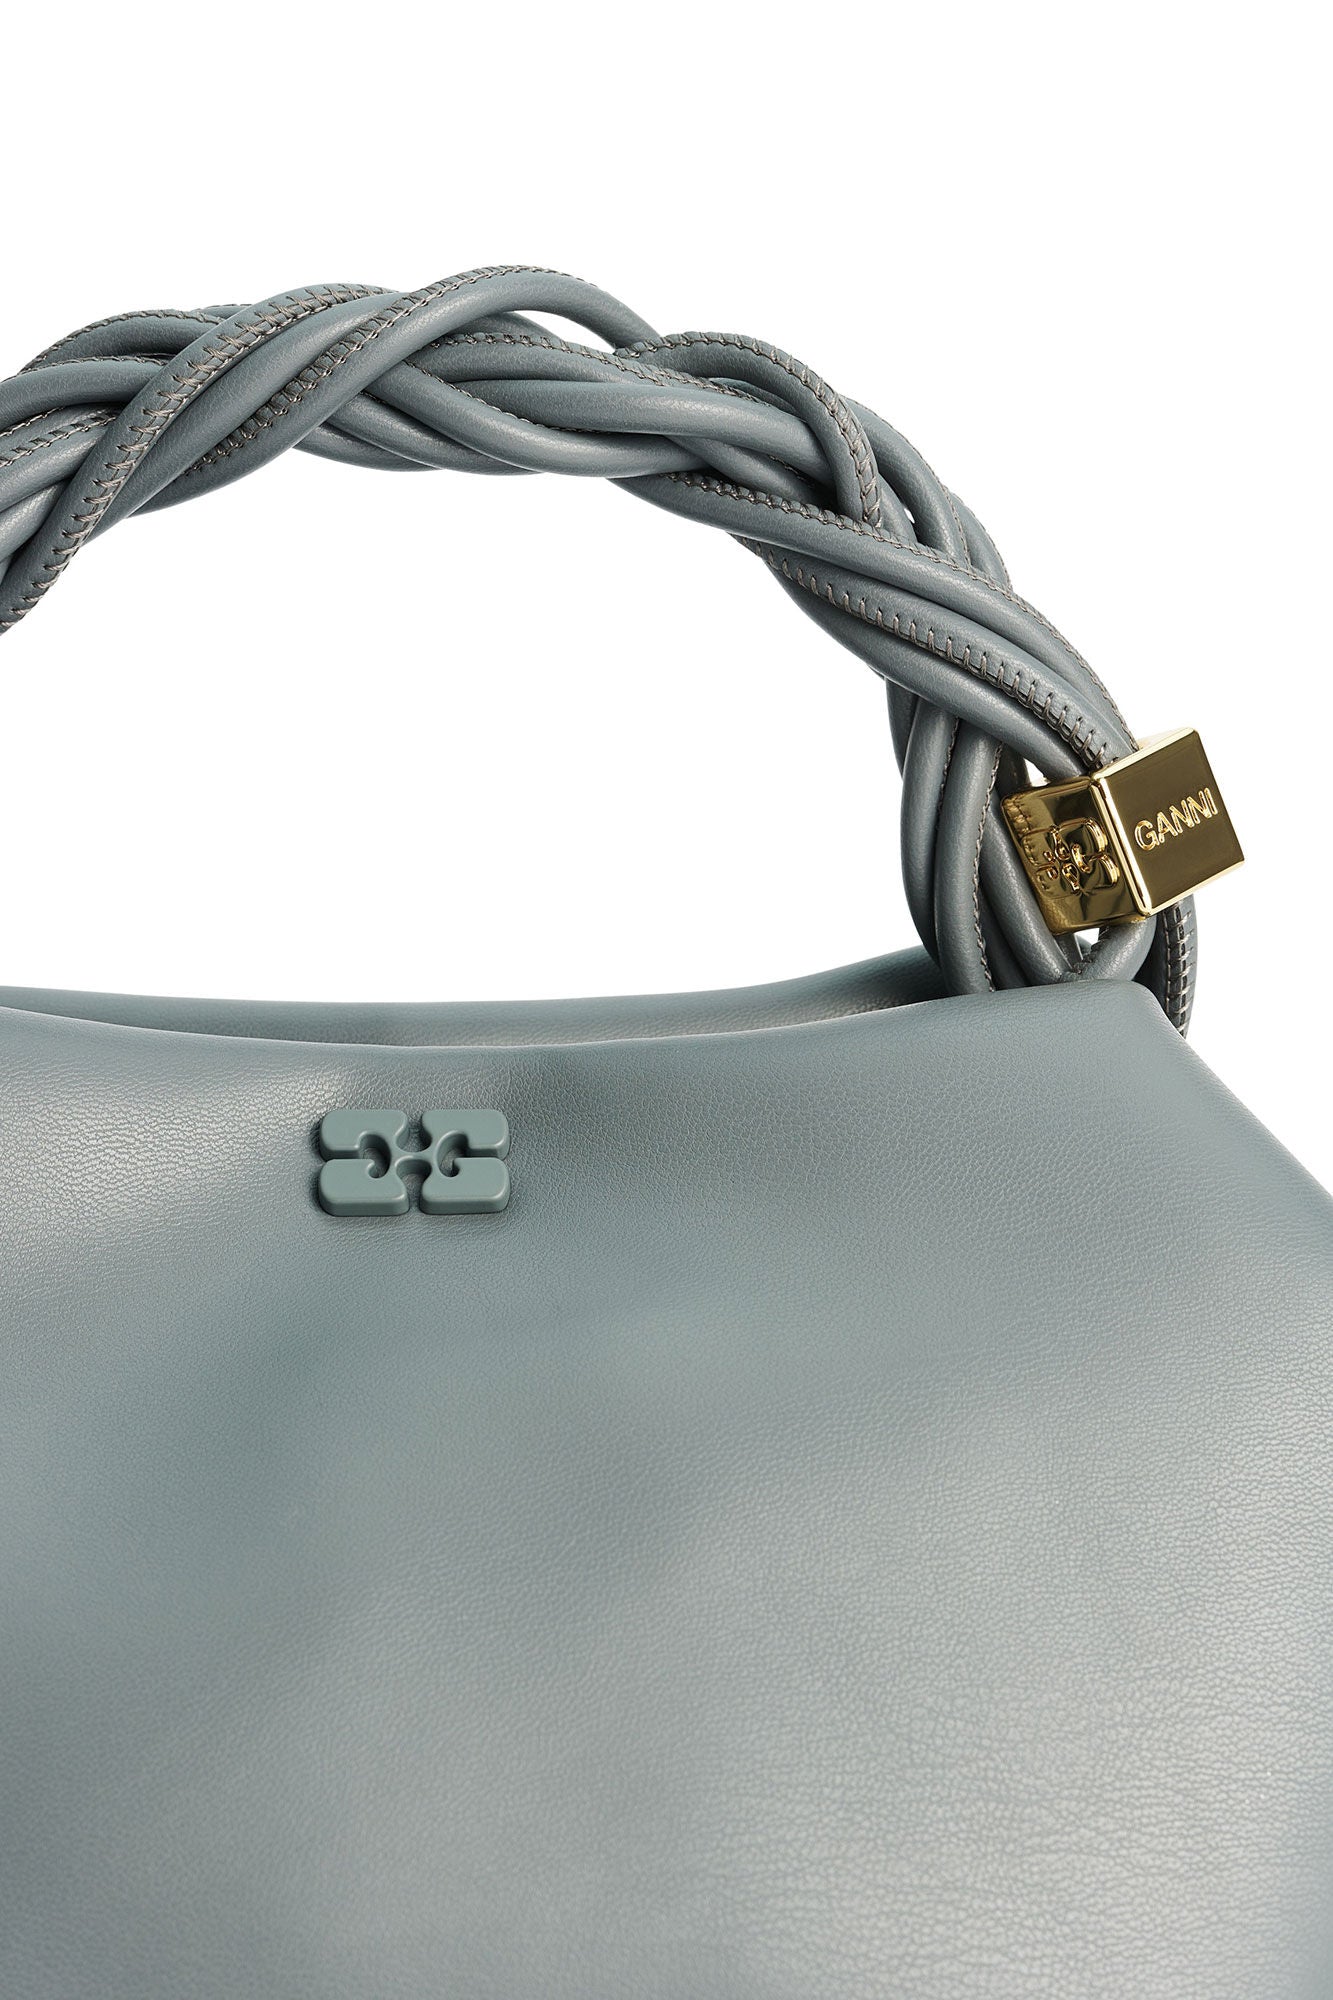 Ganni Bou Bag hexigonal frost grey blue recycled leather | Pipe and Row